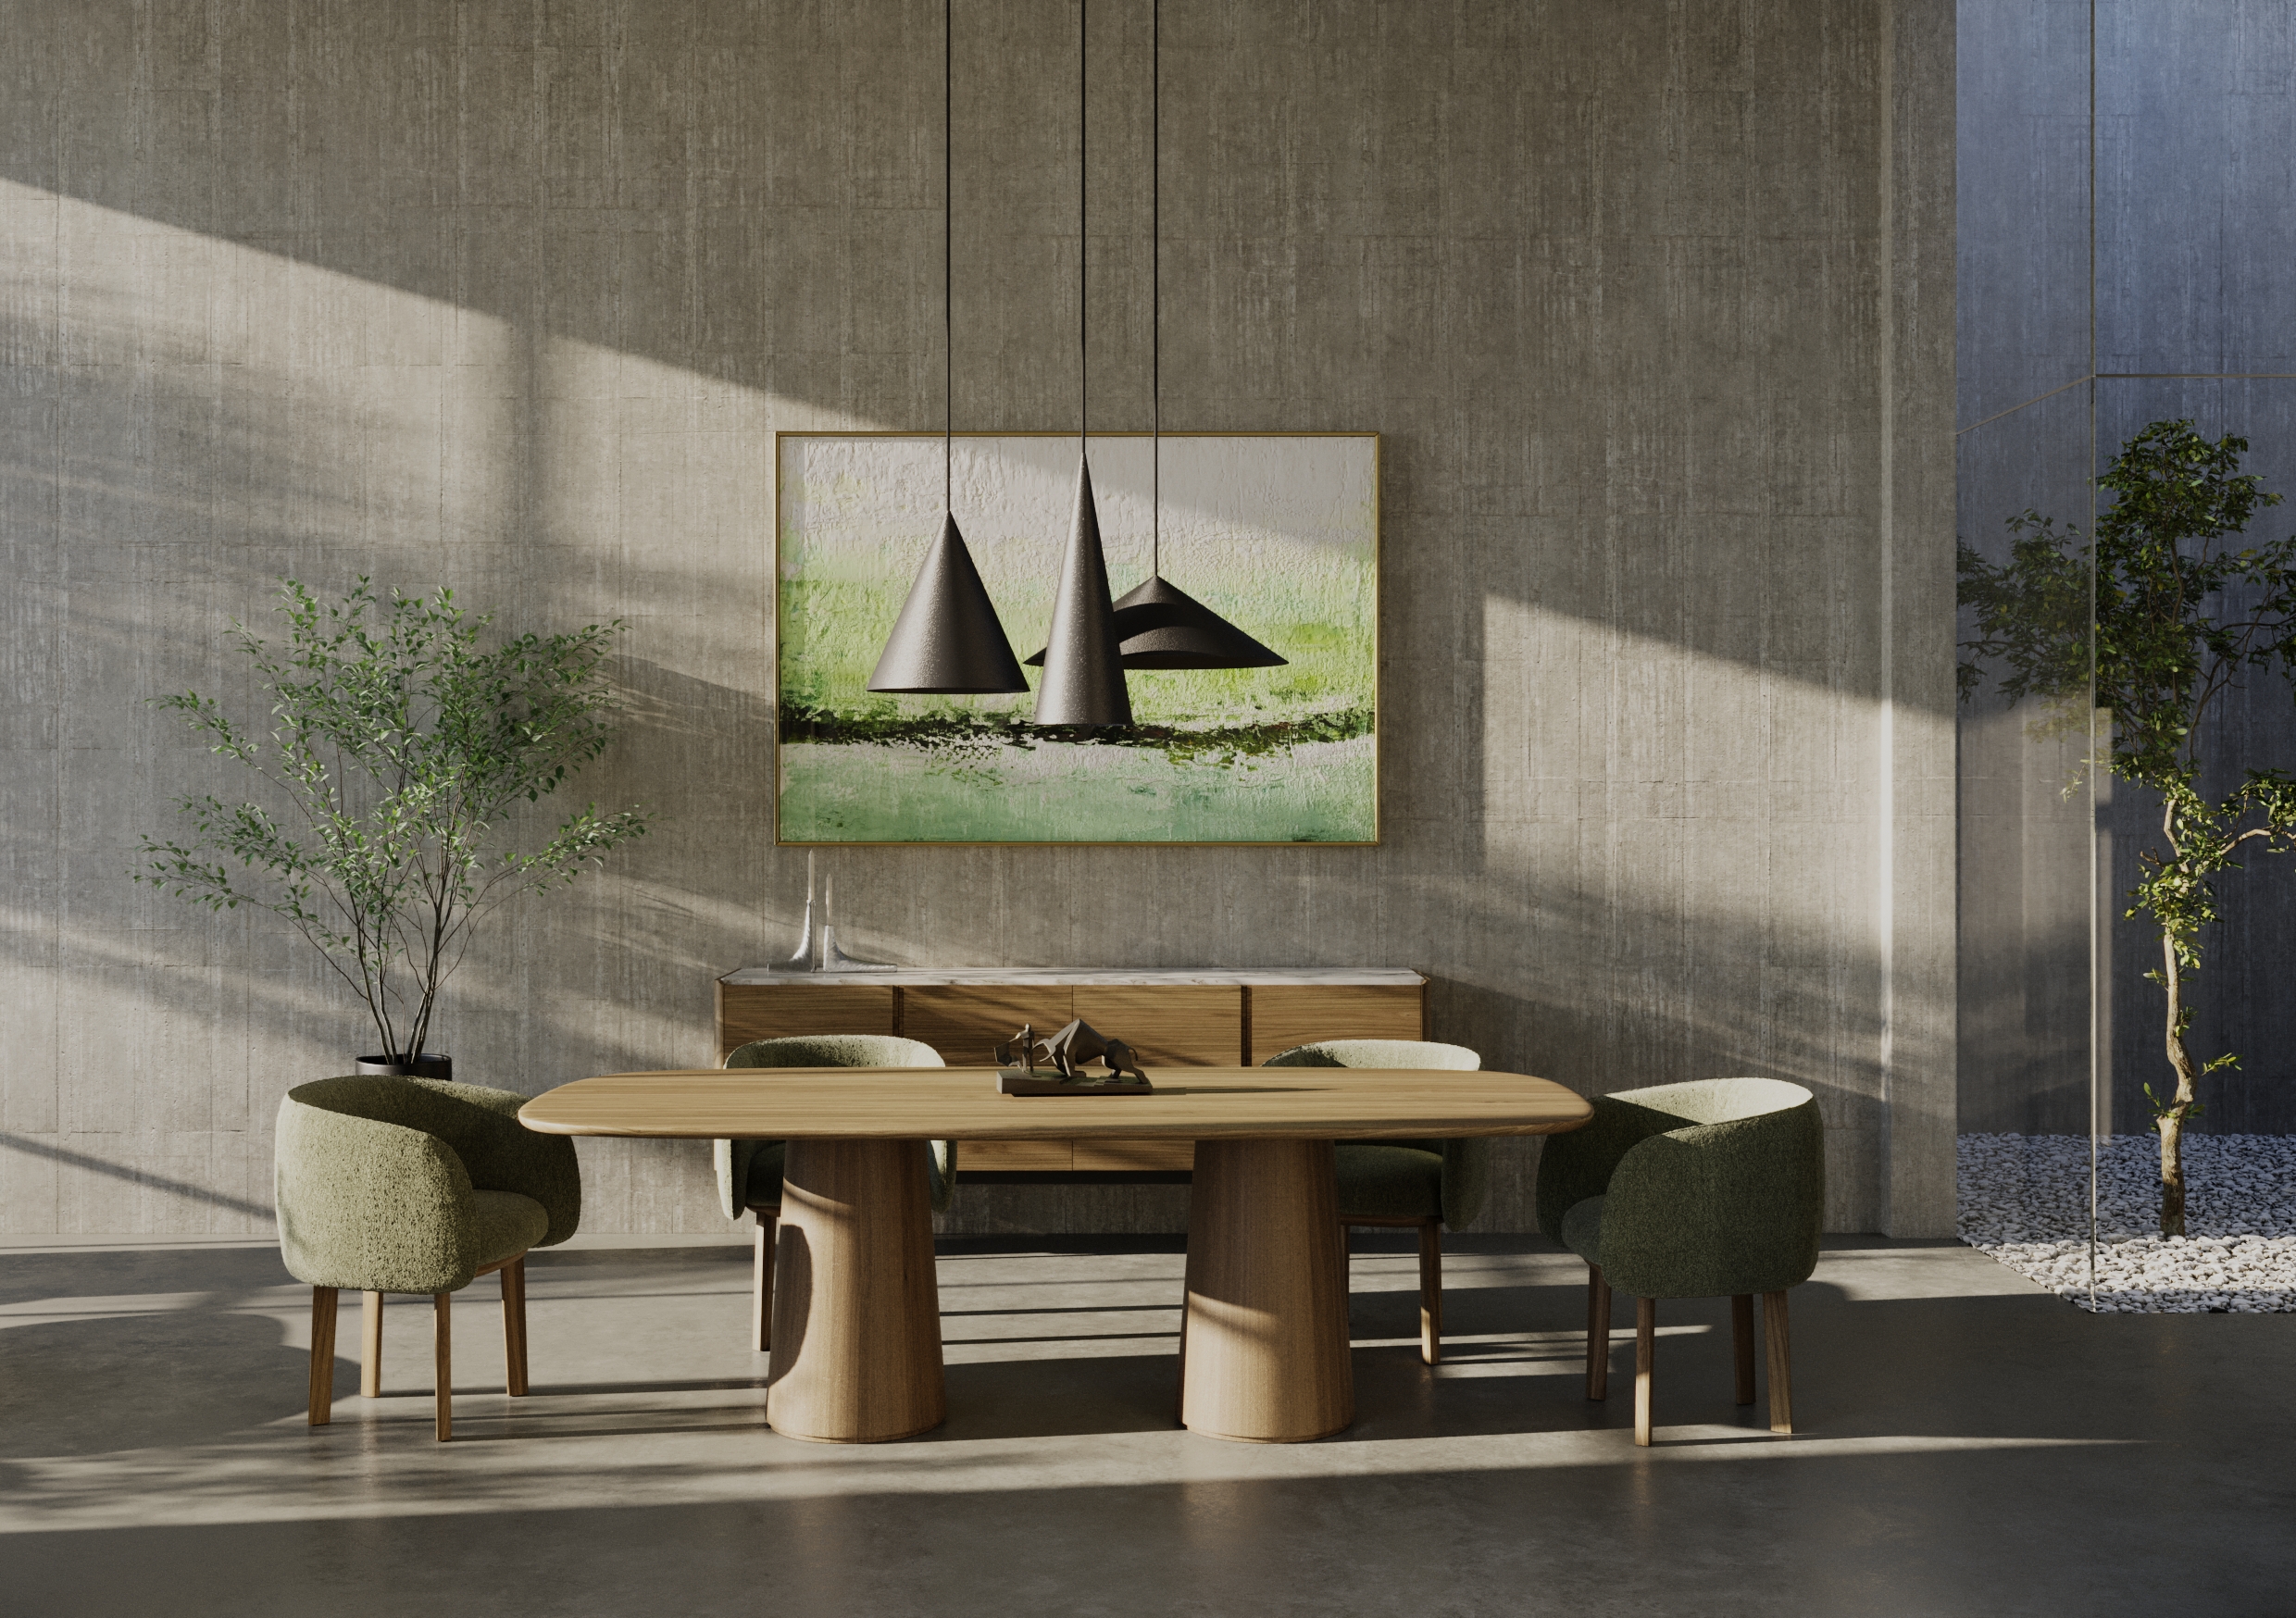 Wewood presents new collection at the Maison & Objet fair